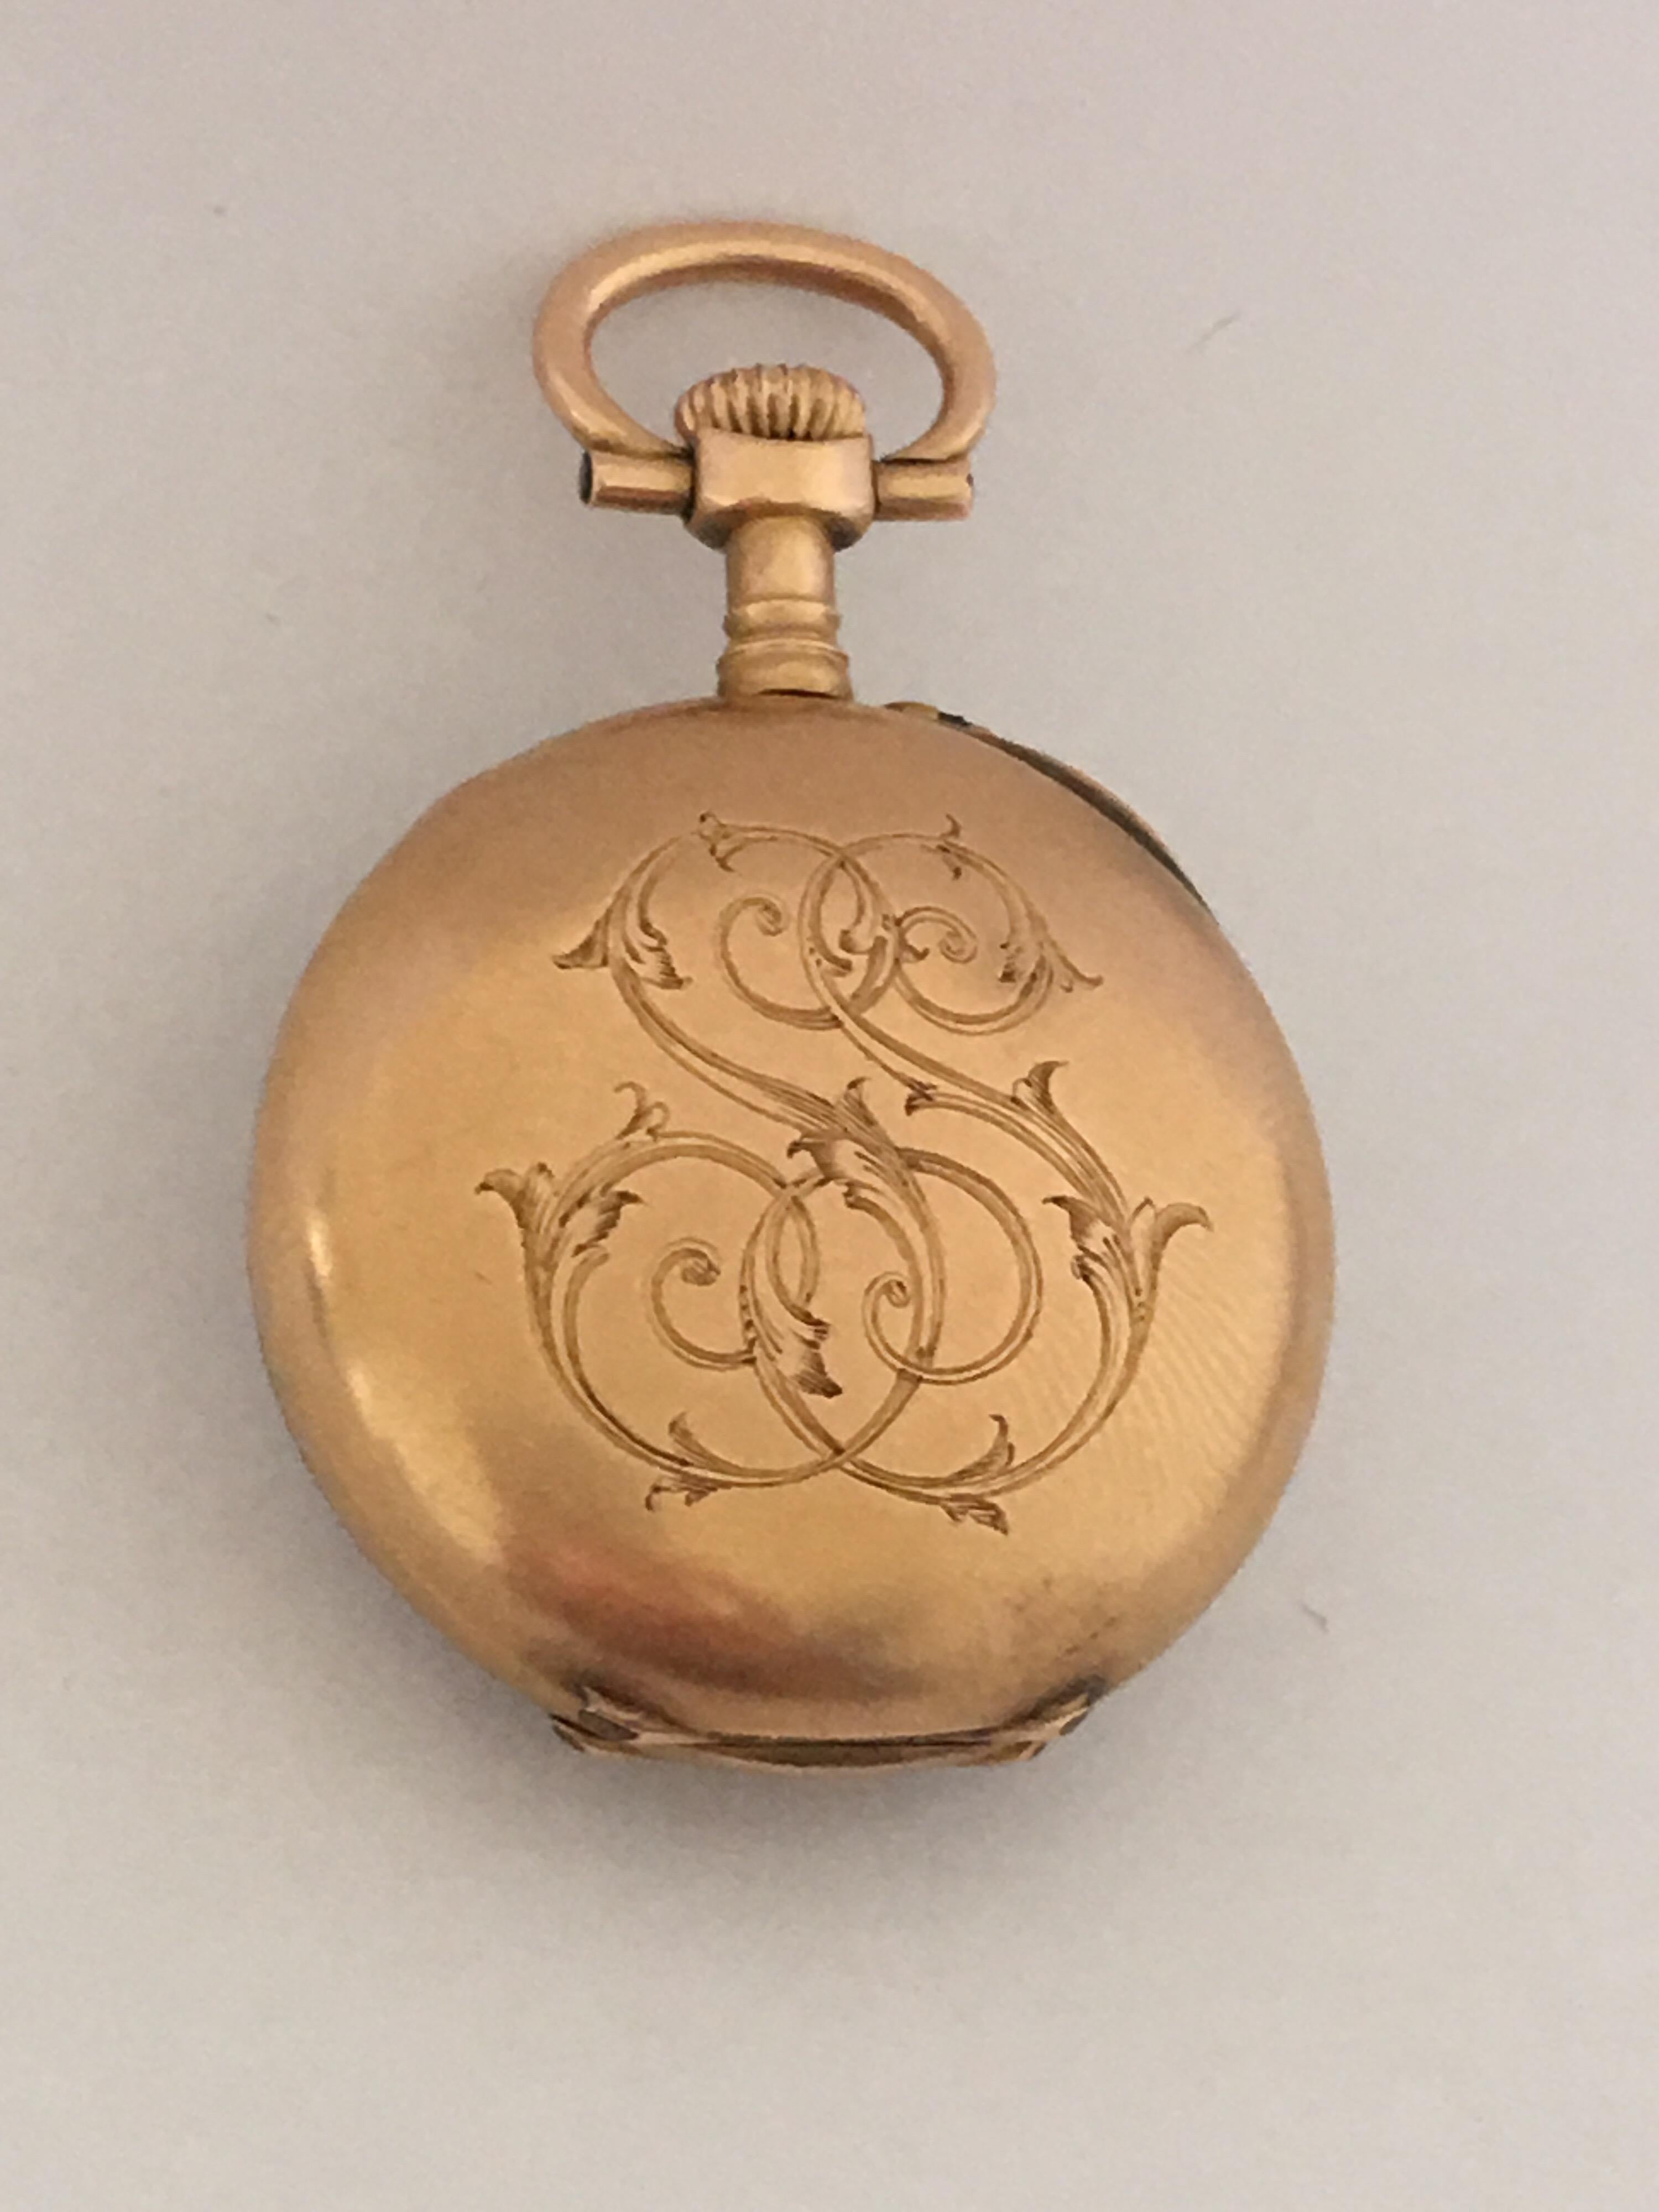 This beautiful small 21mm diameter gold fob watch is in good working condition and it has been serviced and runs well. this watch weighed 17.4 grams 

Please study the images carefully as form part of the description.